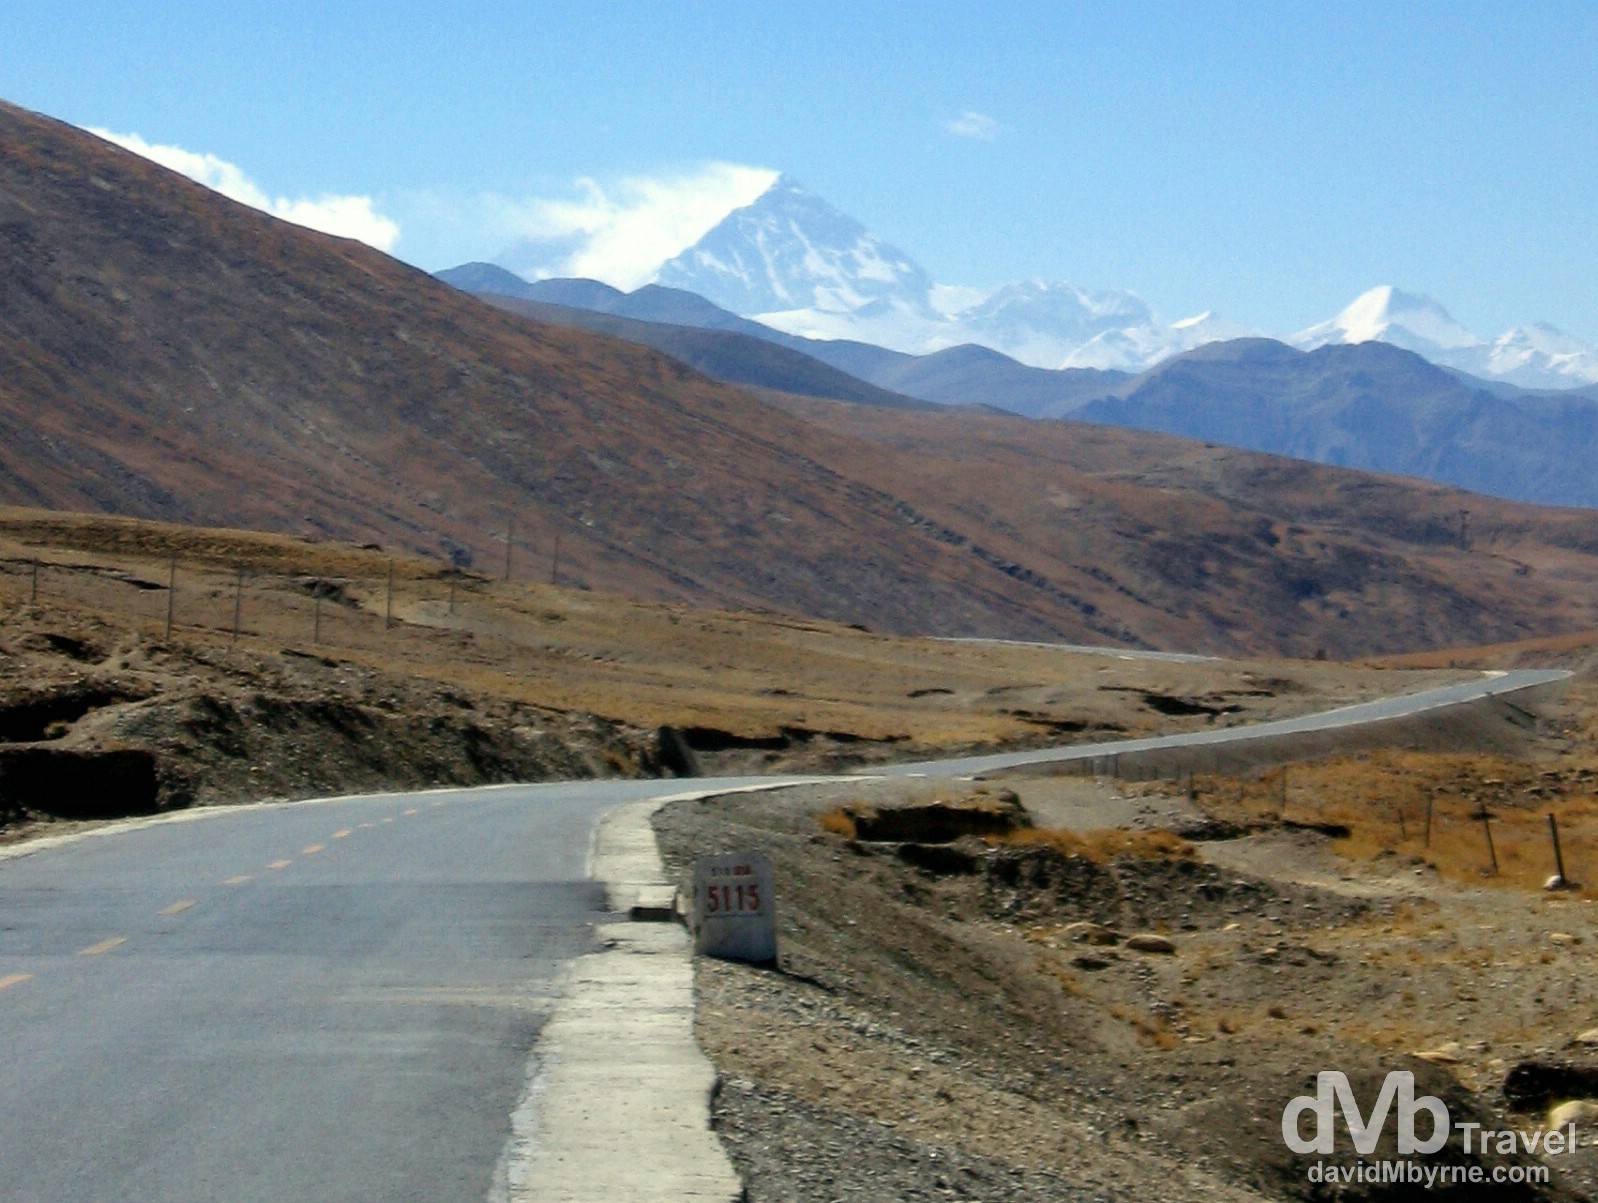 First look at Everest from the 5115 kilometre marker (distance from Shanghai) on The Friendship Highway, Tibet. March 2nd, 2008.